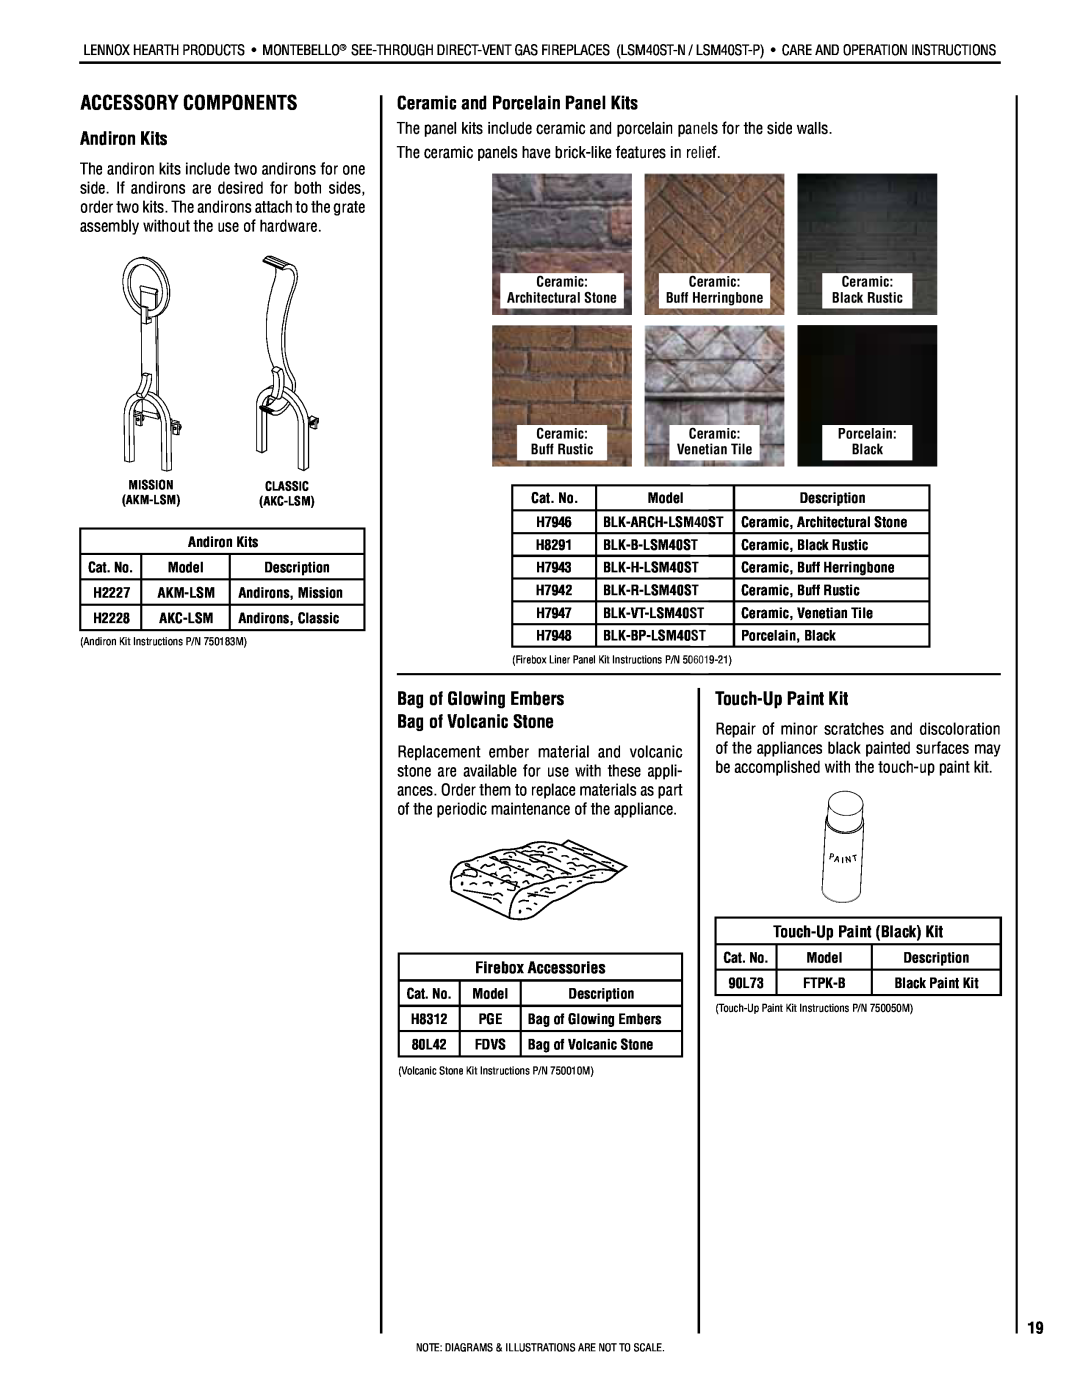 Lennox Hearth LSM40ST-P, LSM40ST-N Accessory Components, Andiron Kits, Ceramic and Porcelain Panel Kits, Touch-UpPaint Kit 